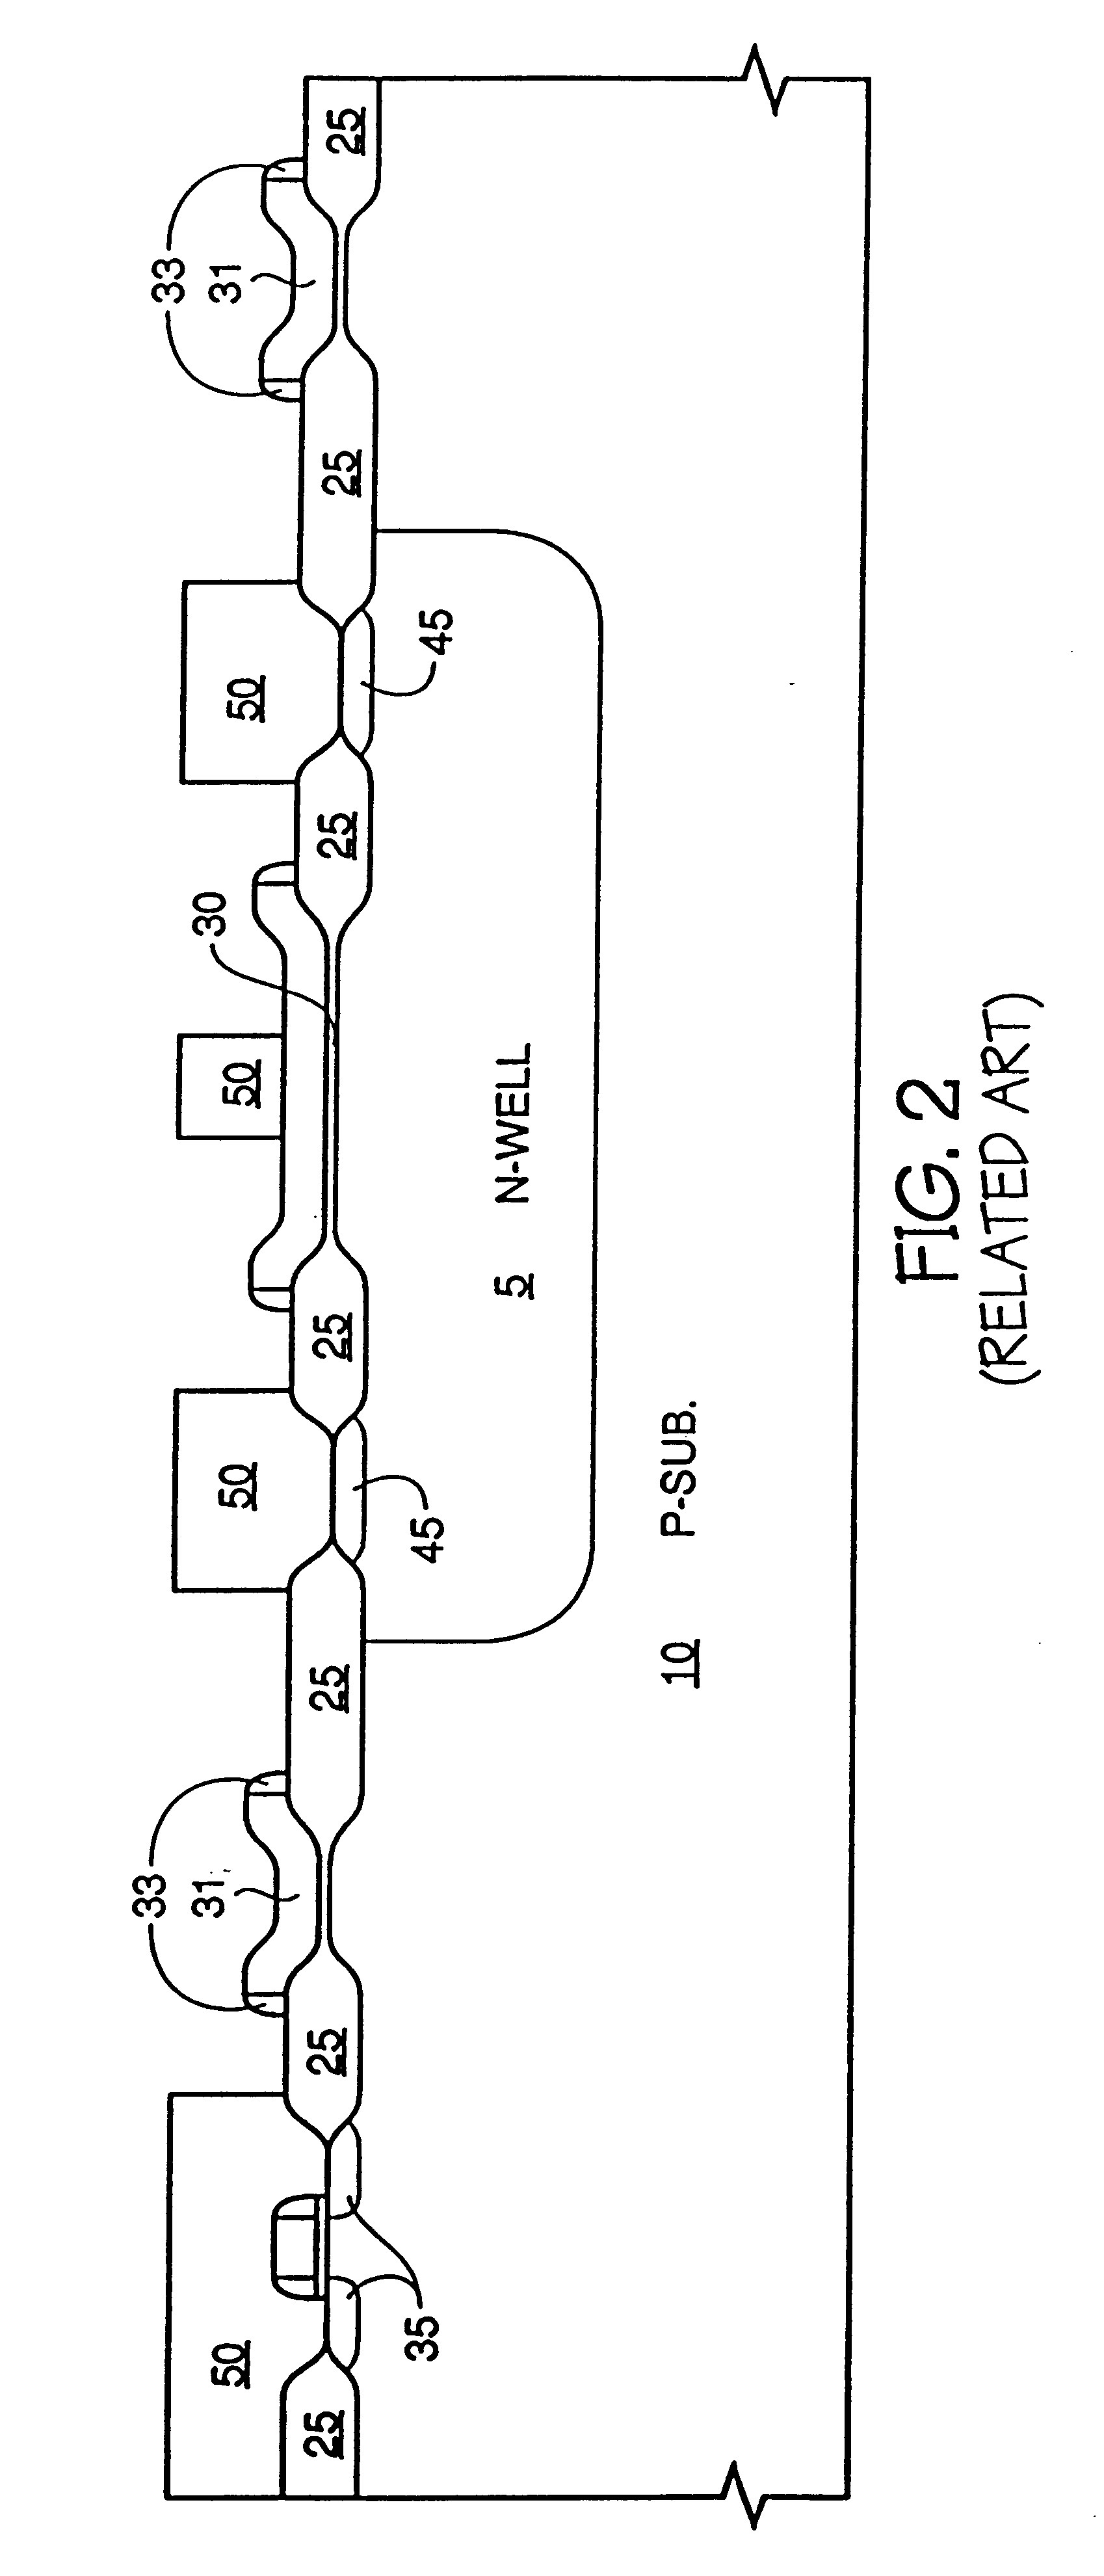 Apparatus improving latchup immunity in a dual-polysilicon gate